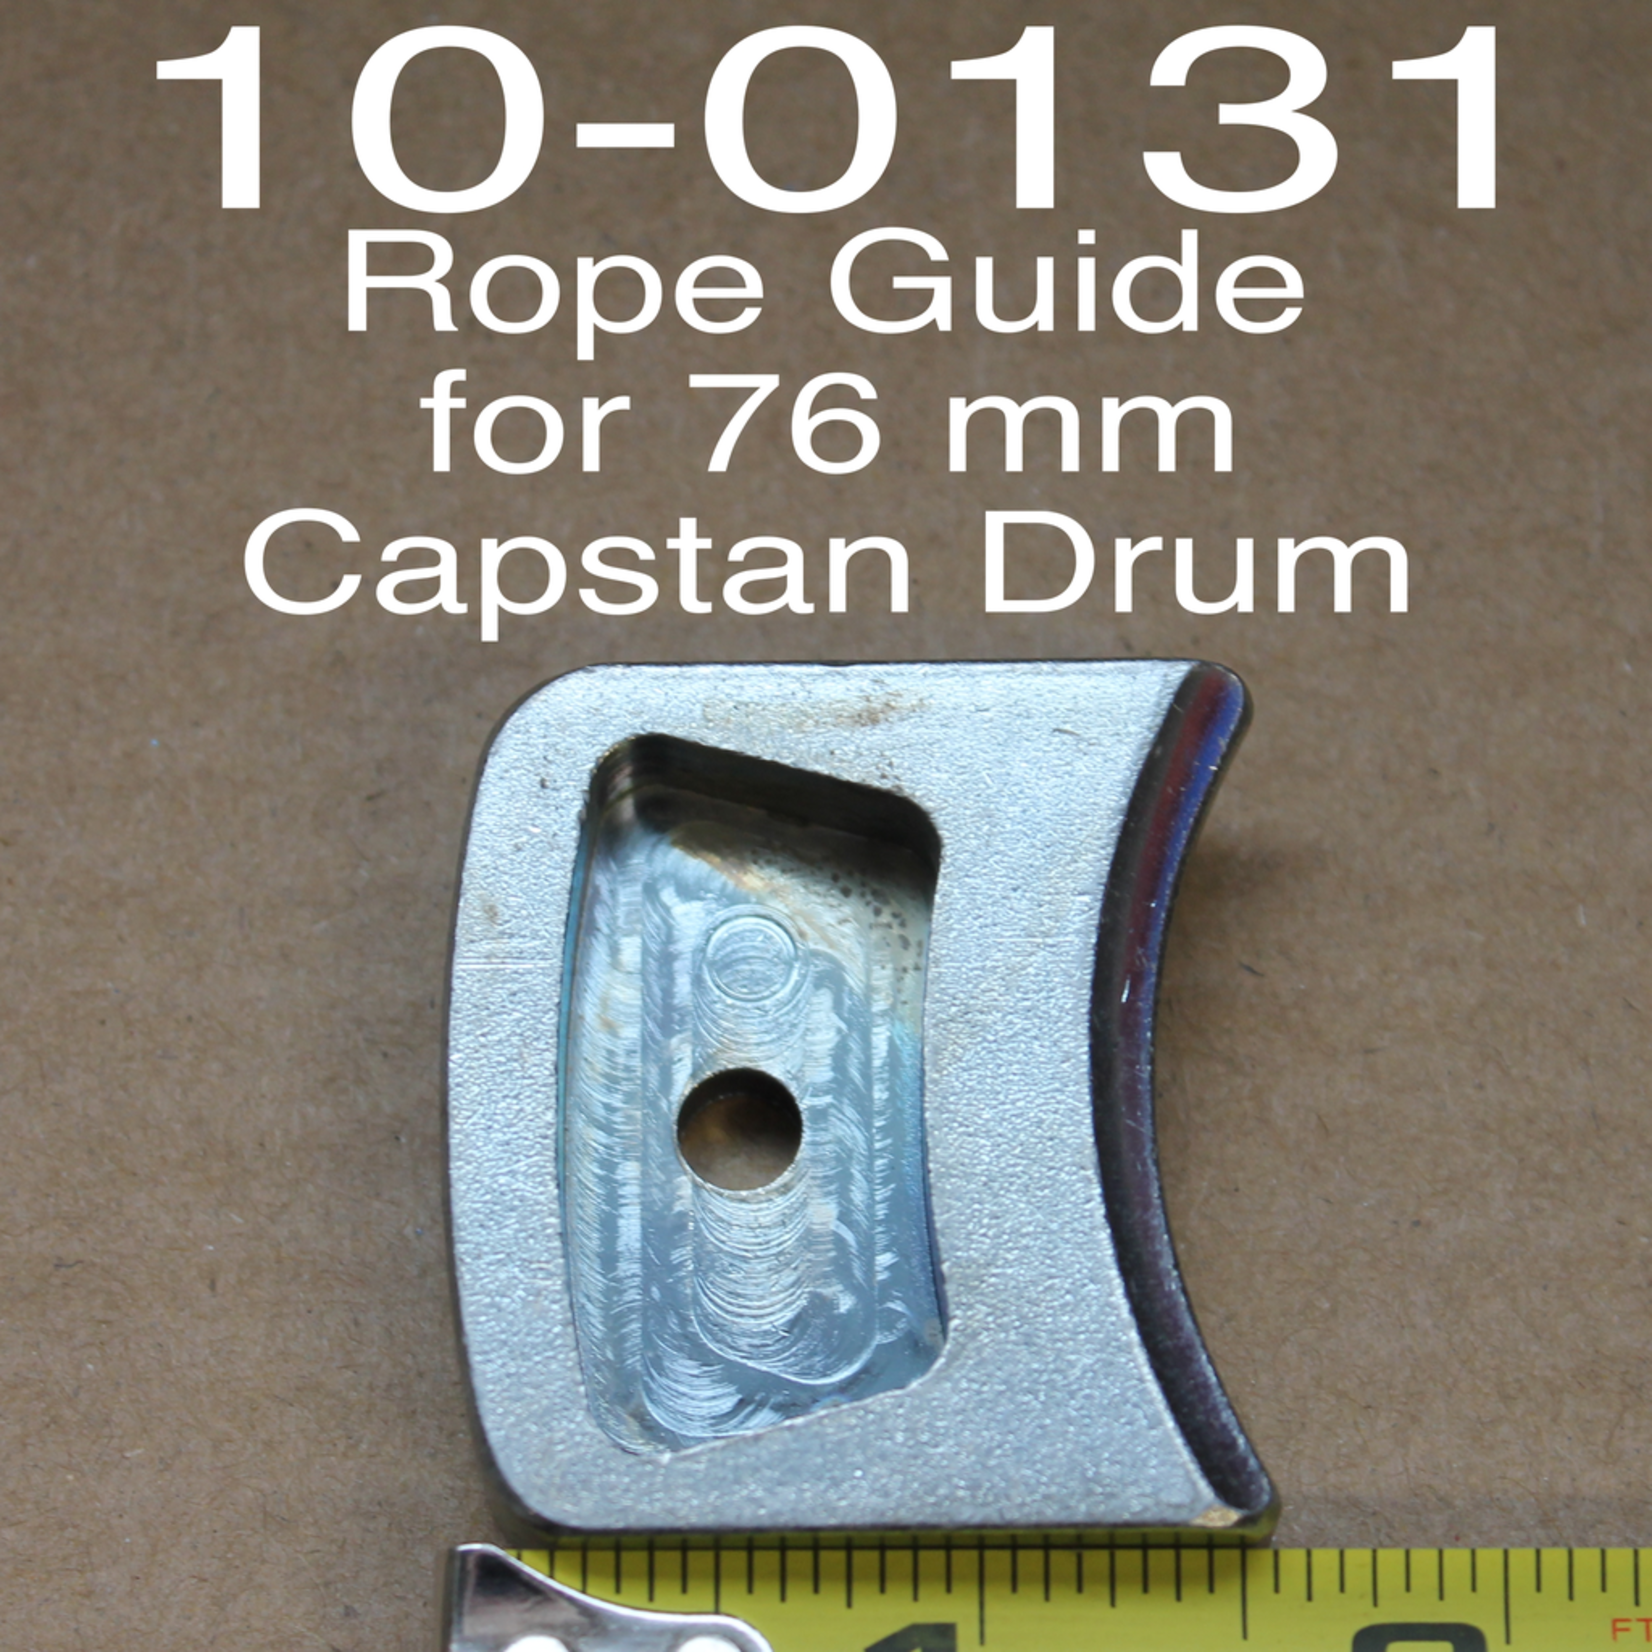 PORTABLE WINCH CO. Rope Guide For Capstan Drum 76 MM